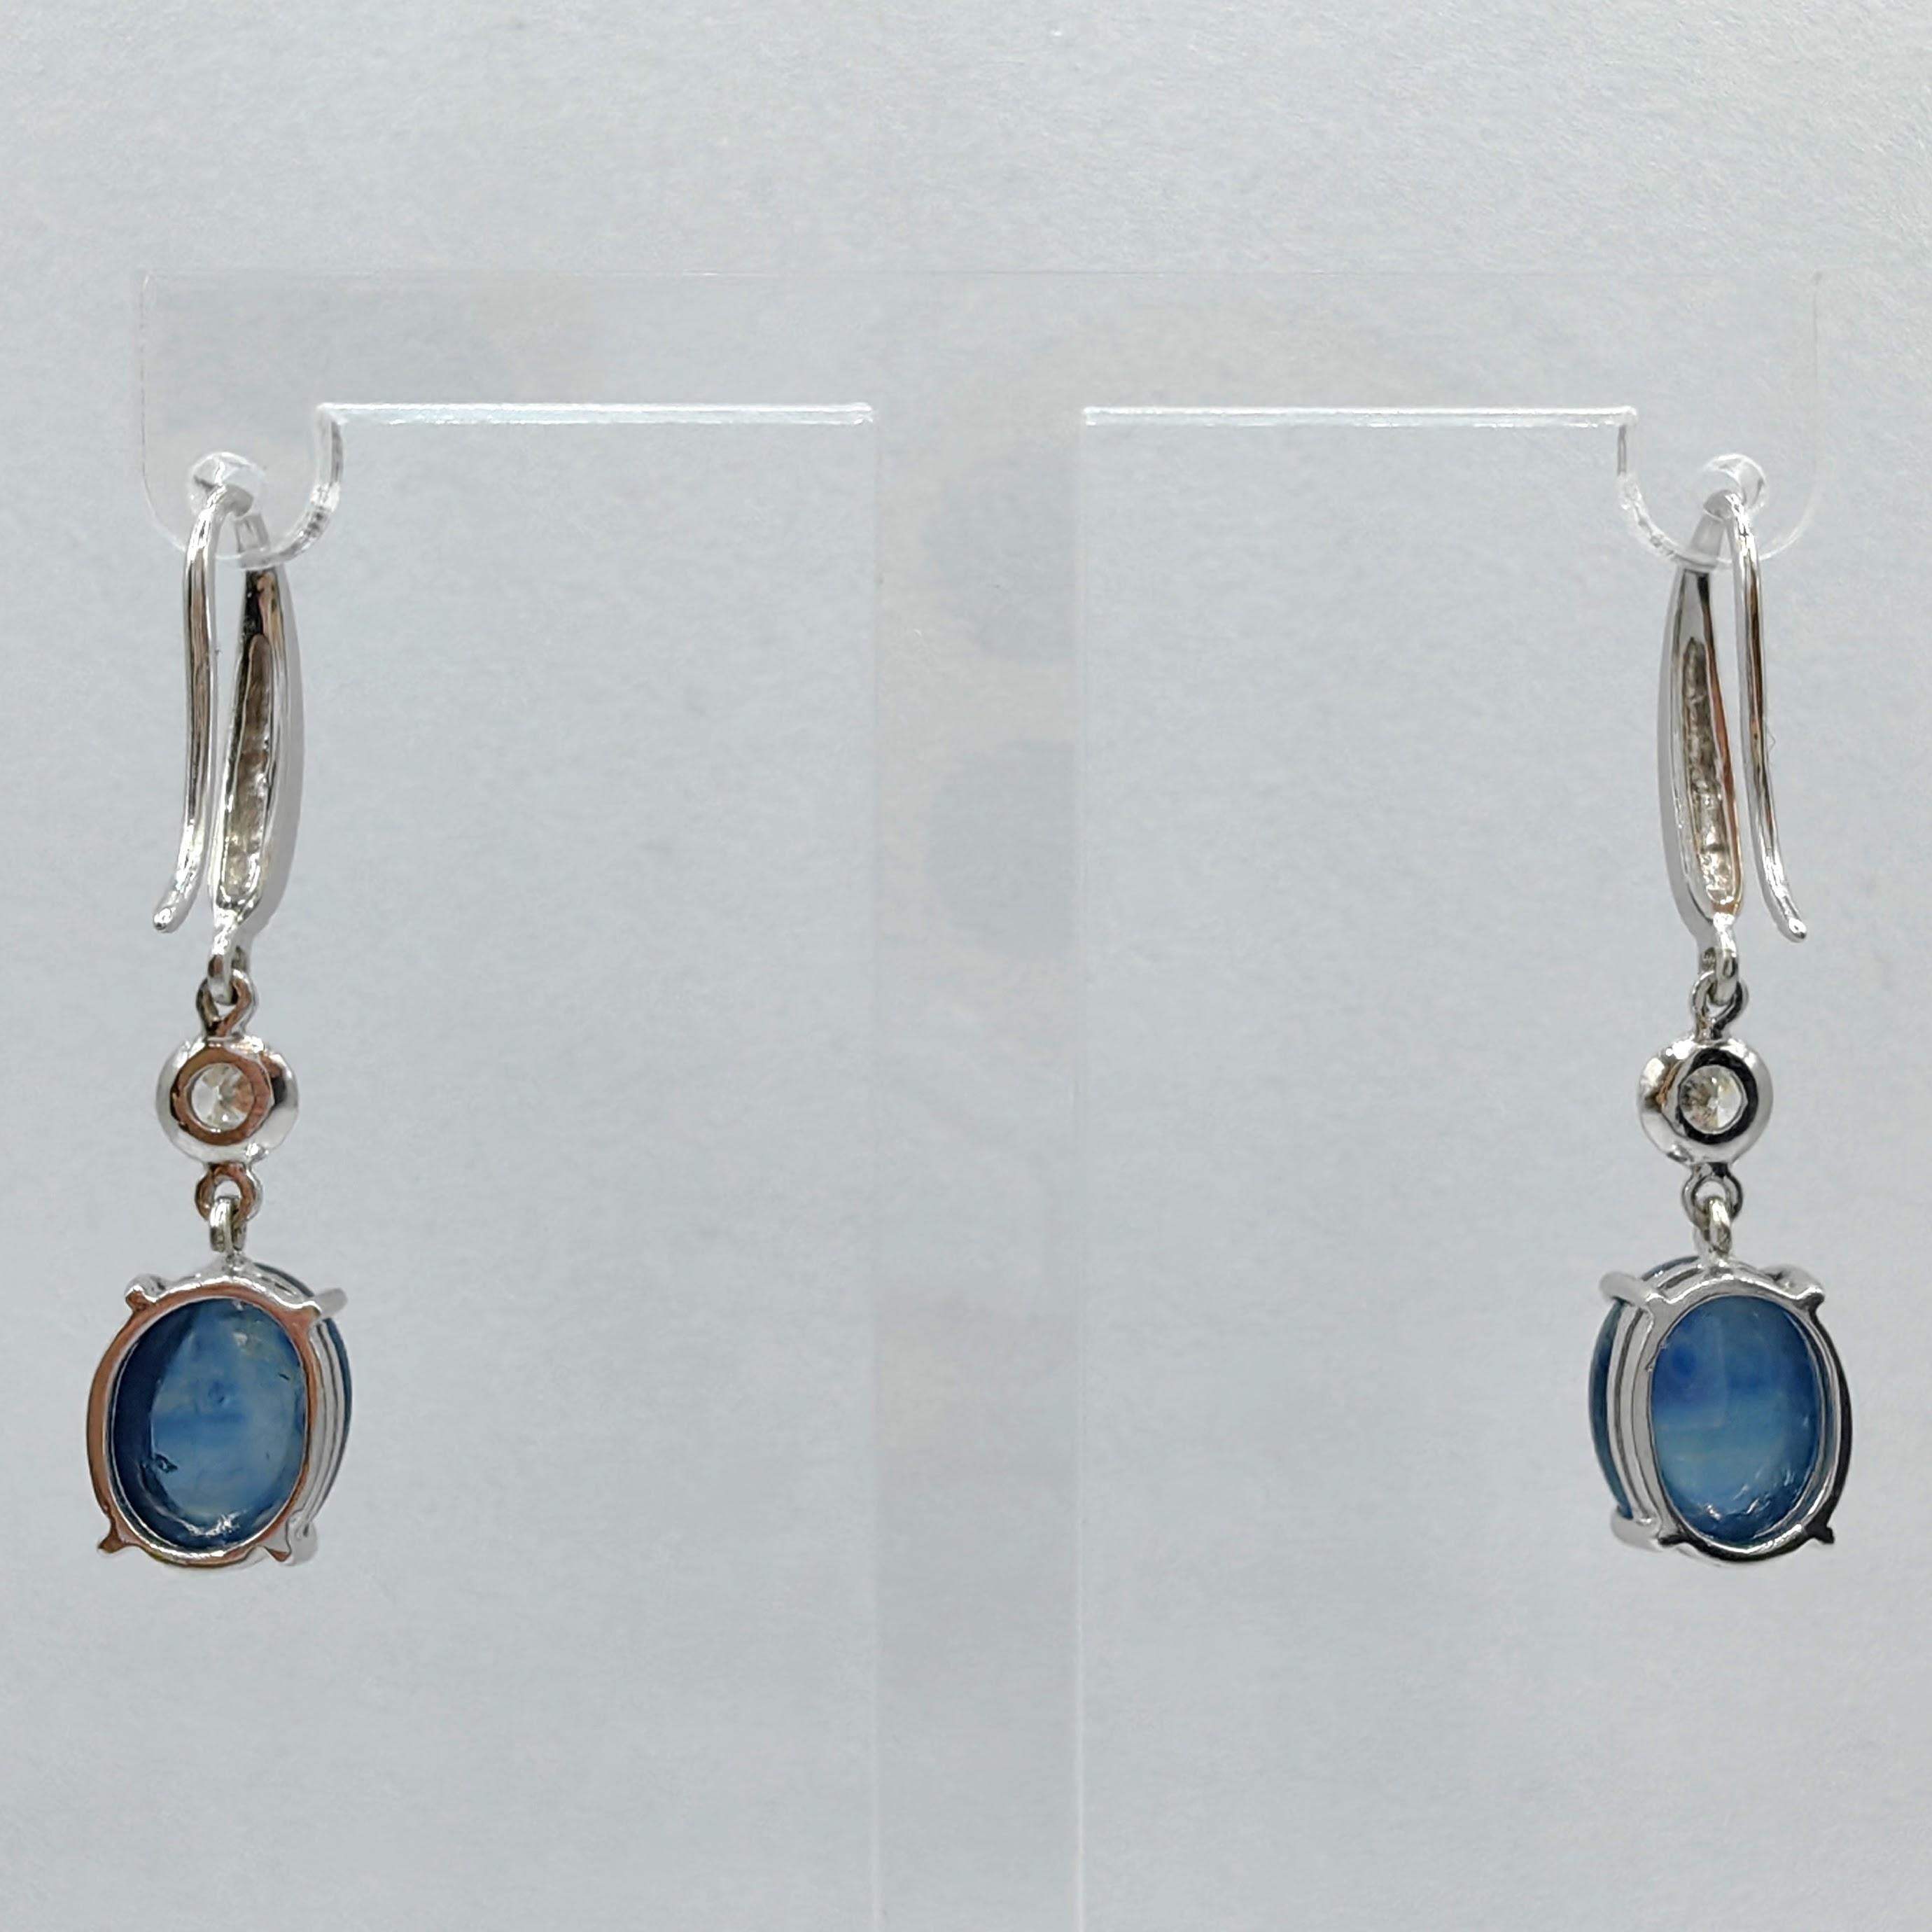 Contemporary 6.18ct Cabochon Blue Sapphire Diamond Dangling Earrings in 18K White Gold